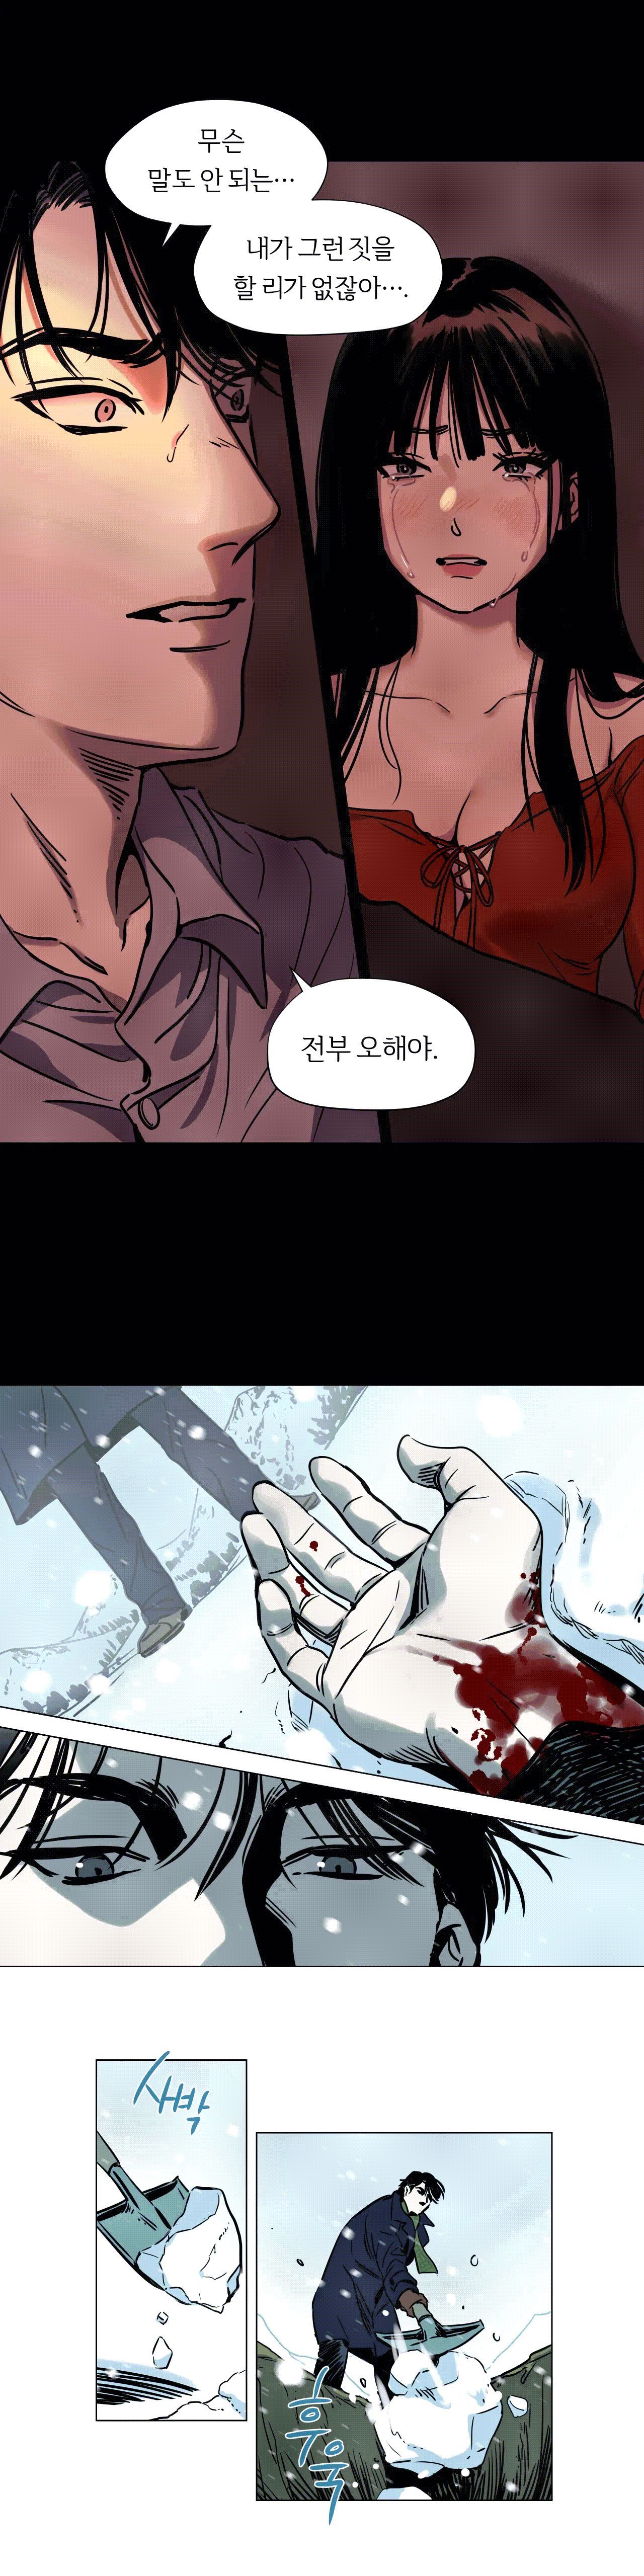 Snowman Raw - Chapter 1 Page 3